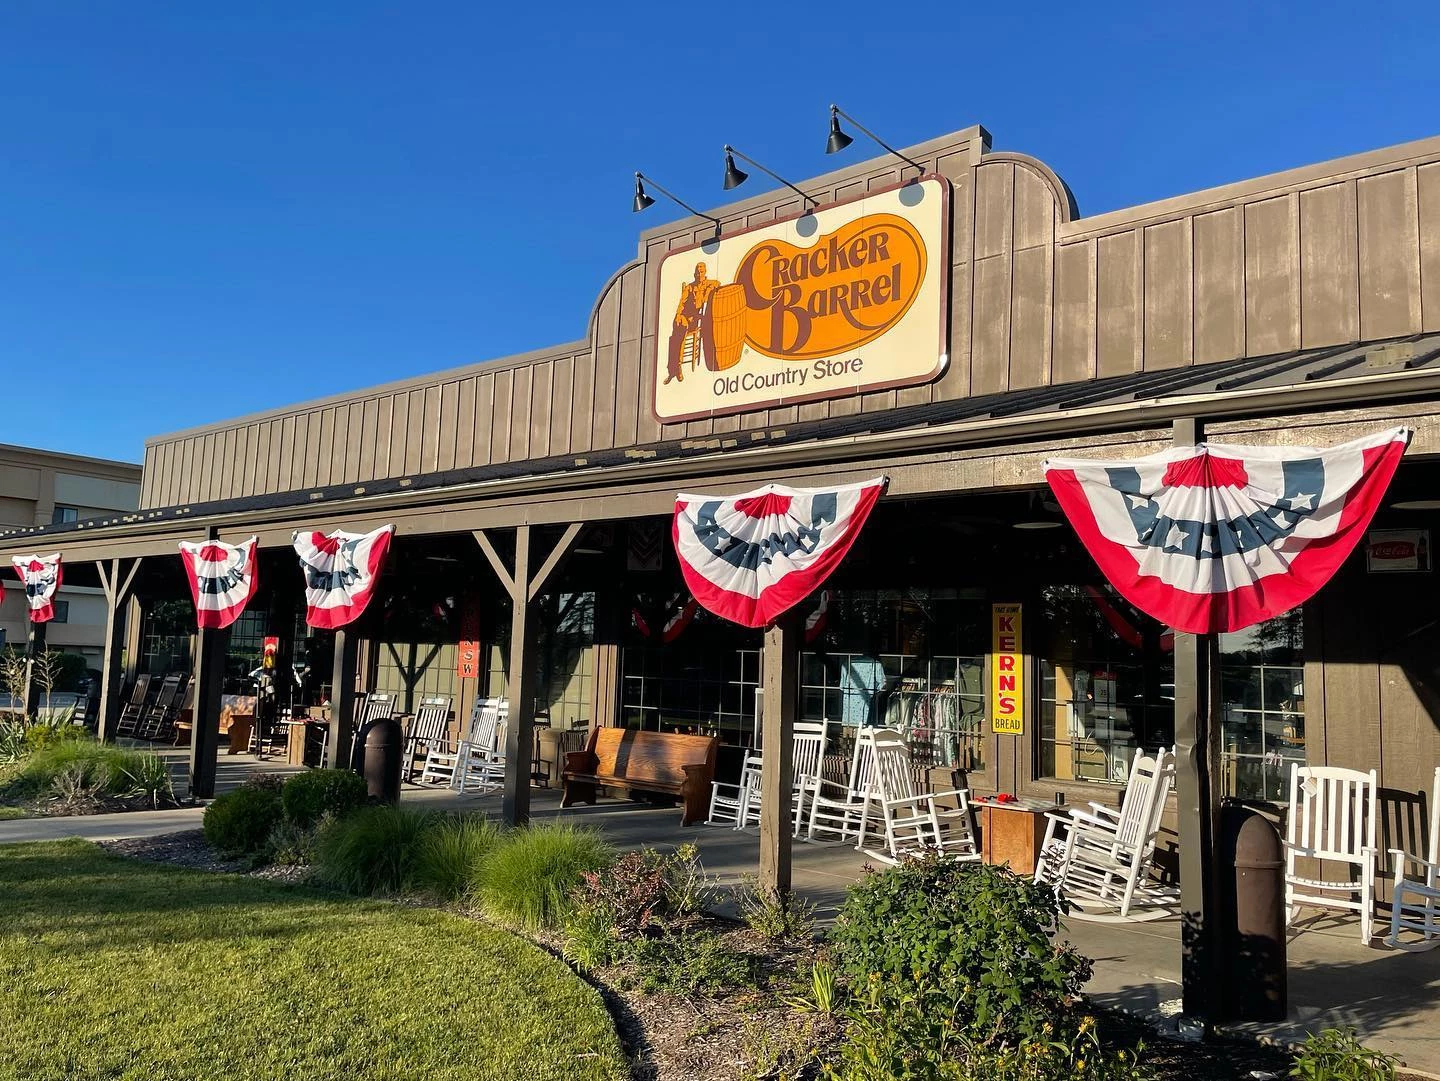 Cracker Barrel Old Country Store - Make your own corn muffins at